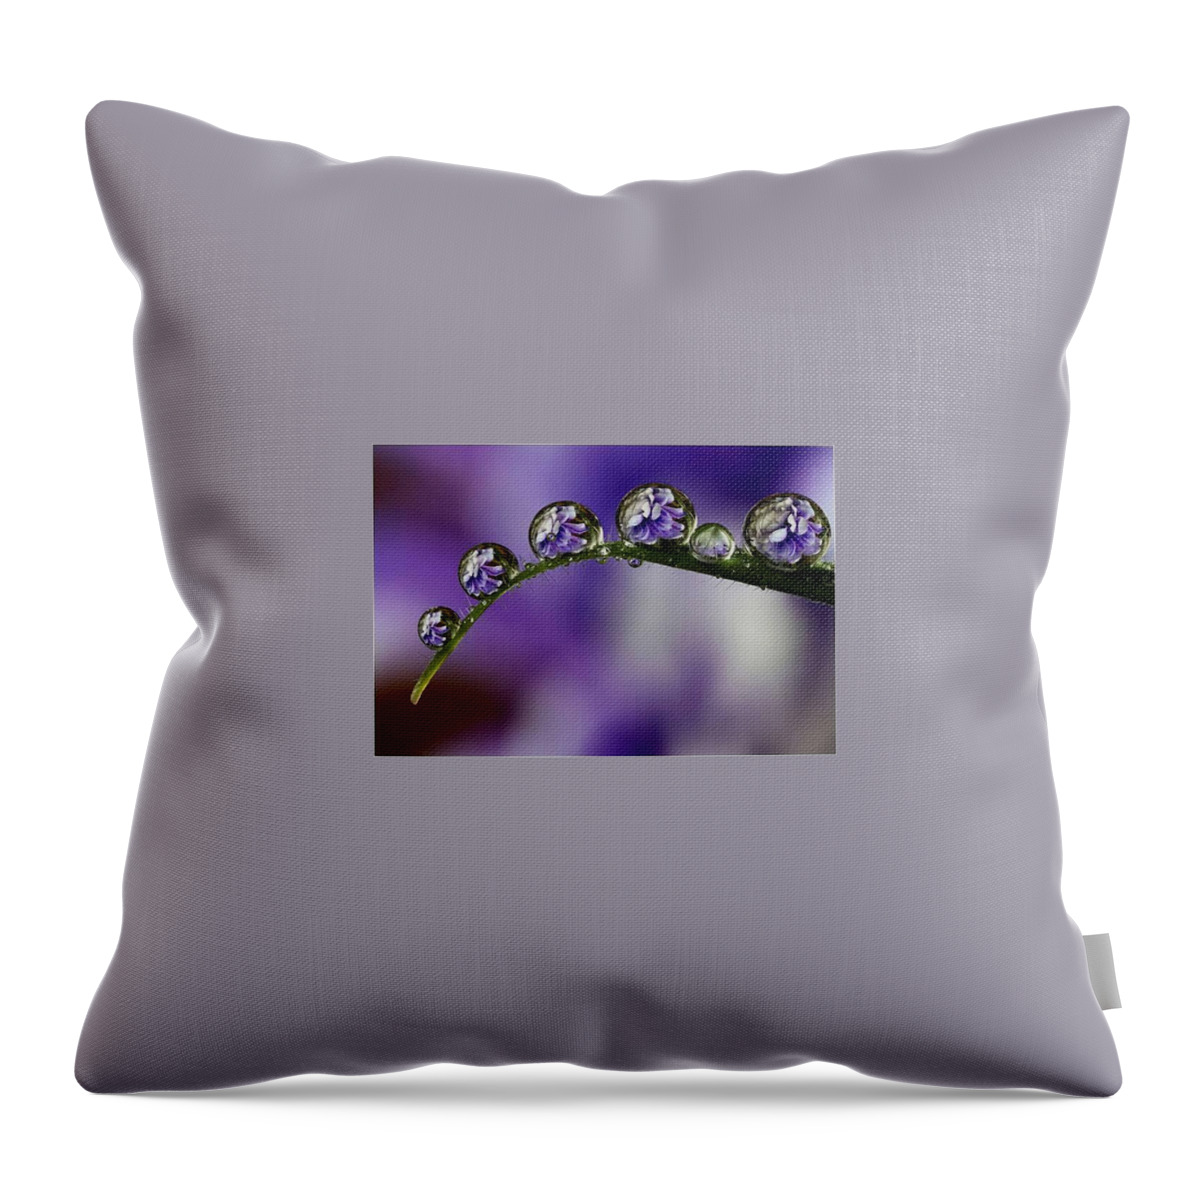 Raindrop Reflections 41 Throw Pillow featuring the photograph Raindrop Reflections 41 by Doug Norkum